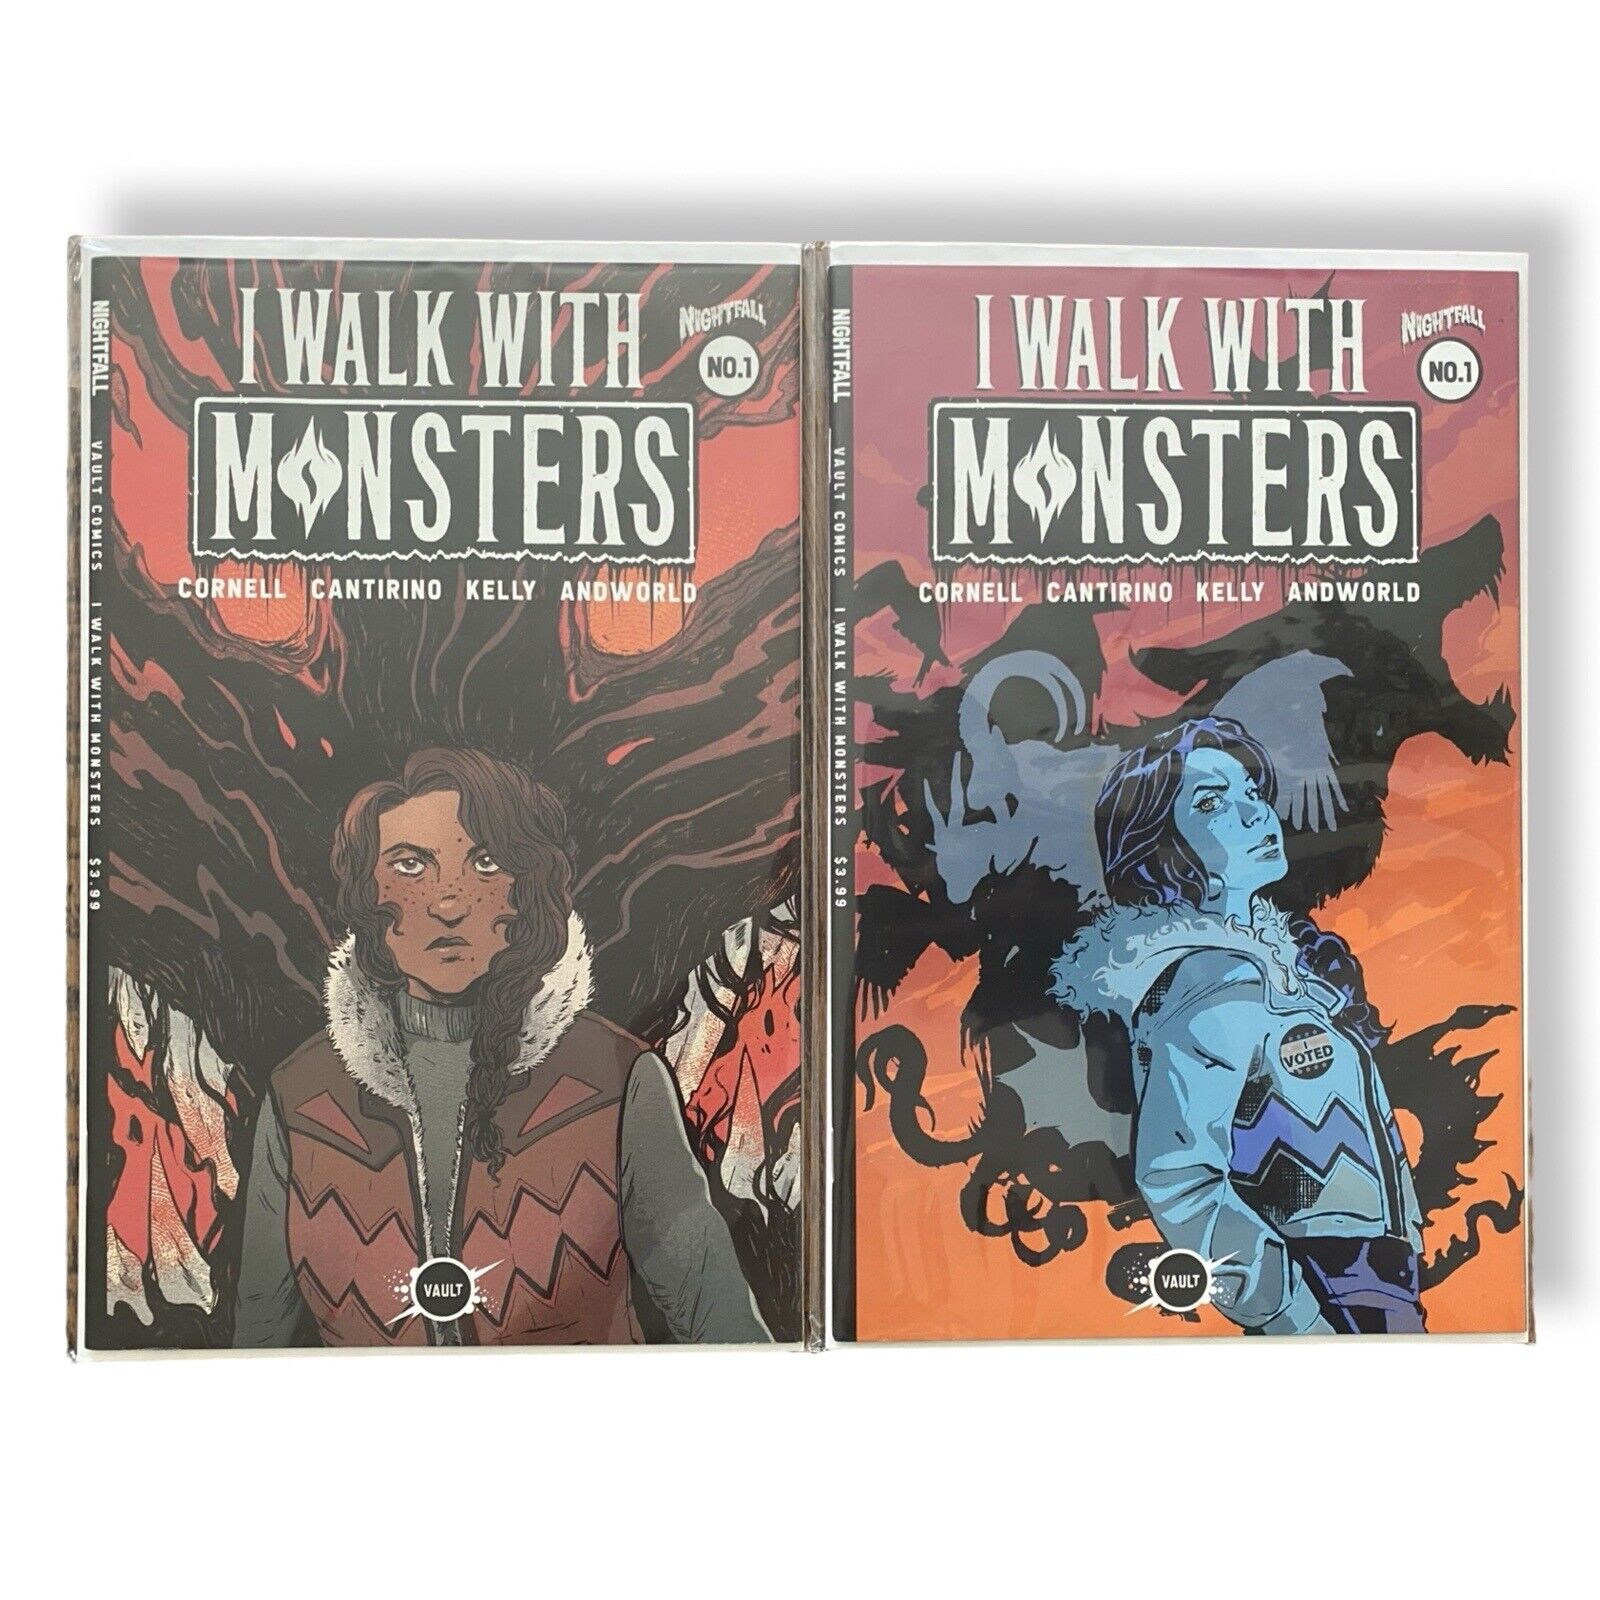 I Walk With Monsters Comic Book Lot #1 + Variant Cover - 2 Copies - NM+ - First